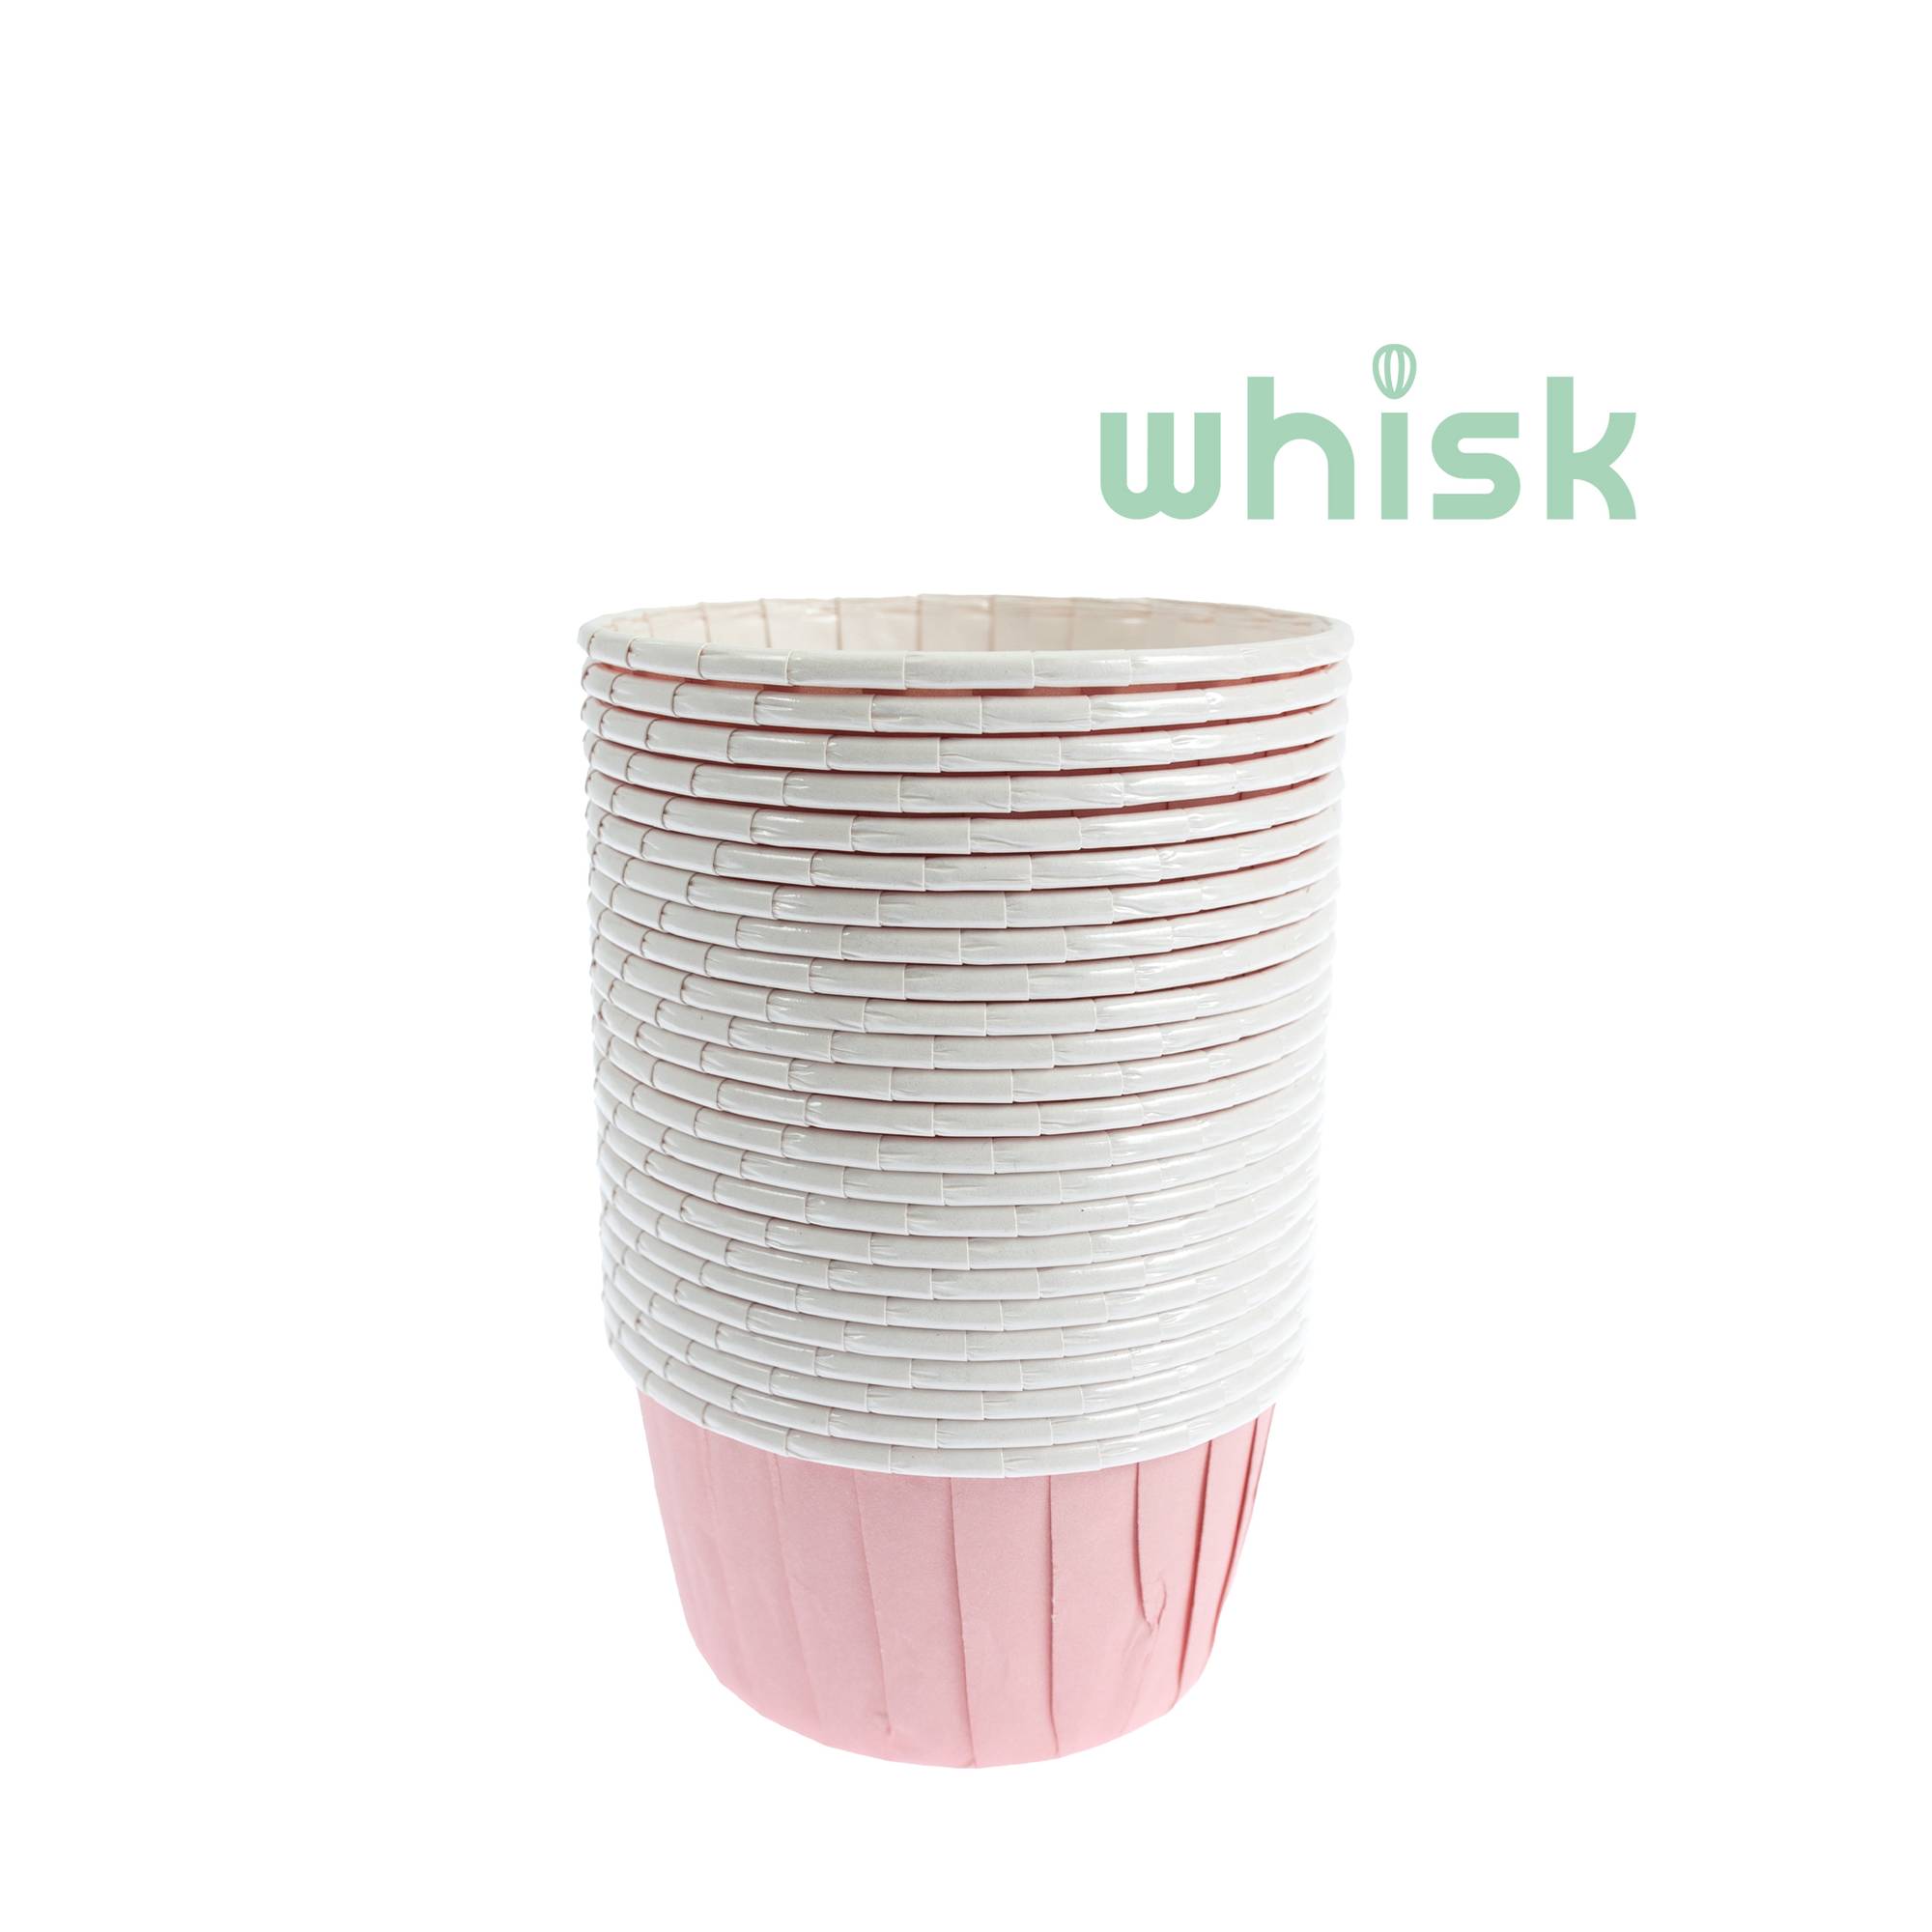 Whisk Pink Baking Cups 24 Pack